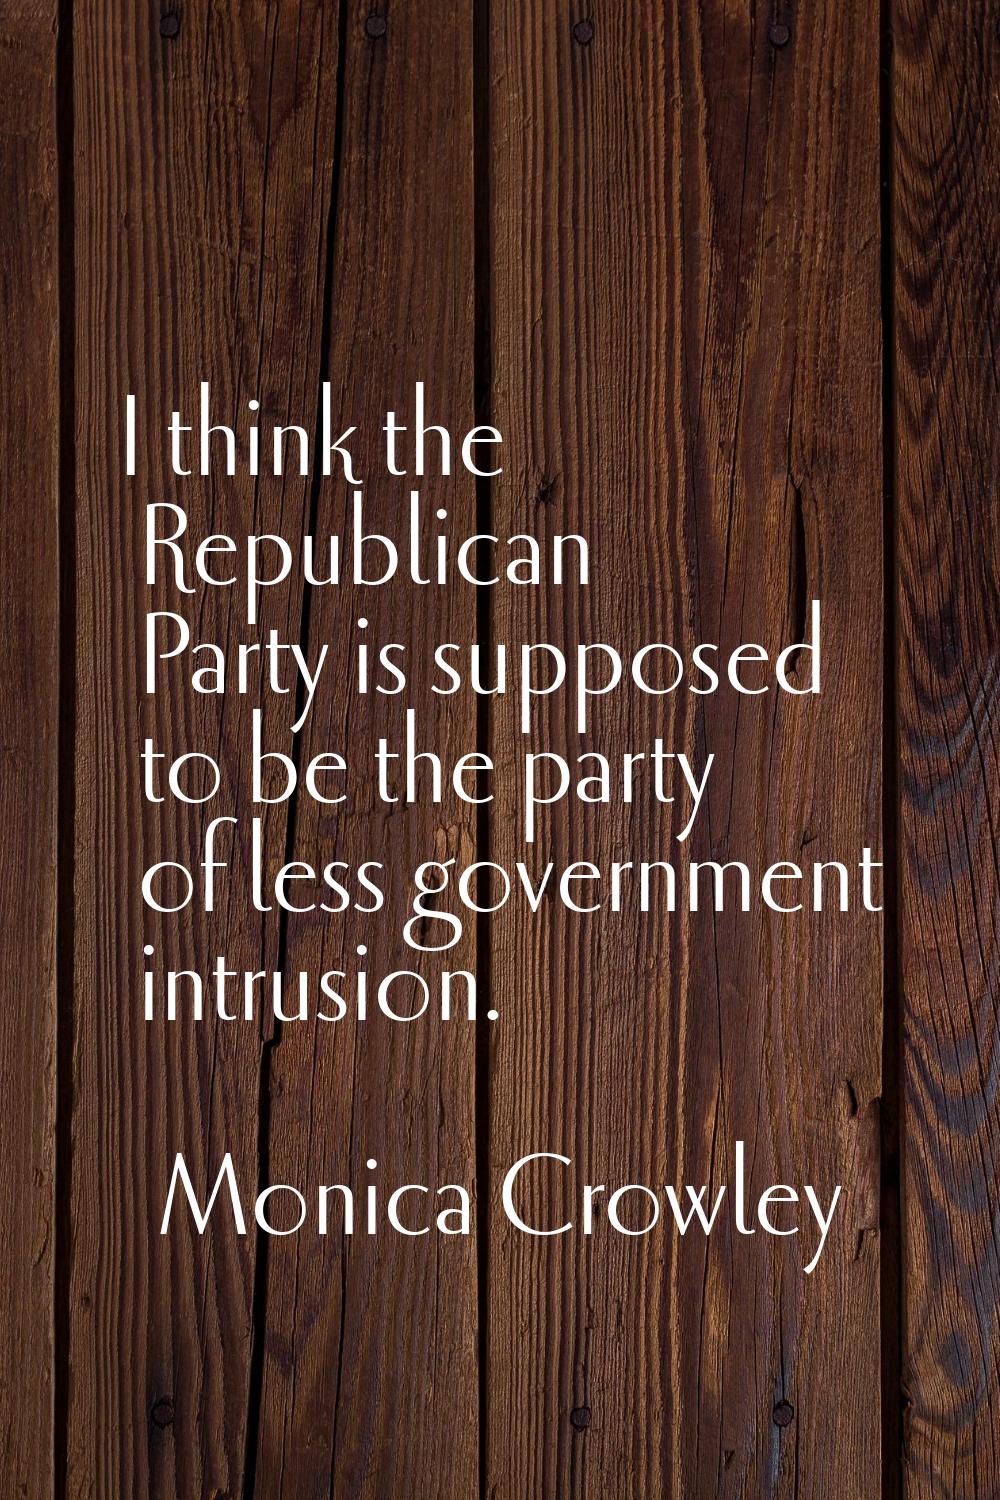 I think the Republican Party is supposed to be the party of less government intrusion.